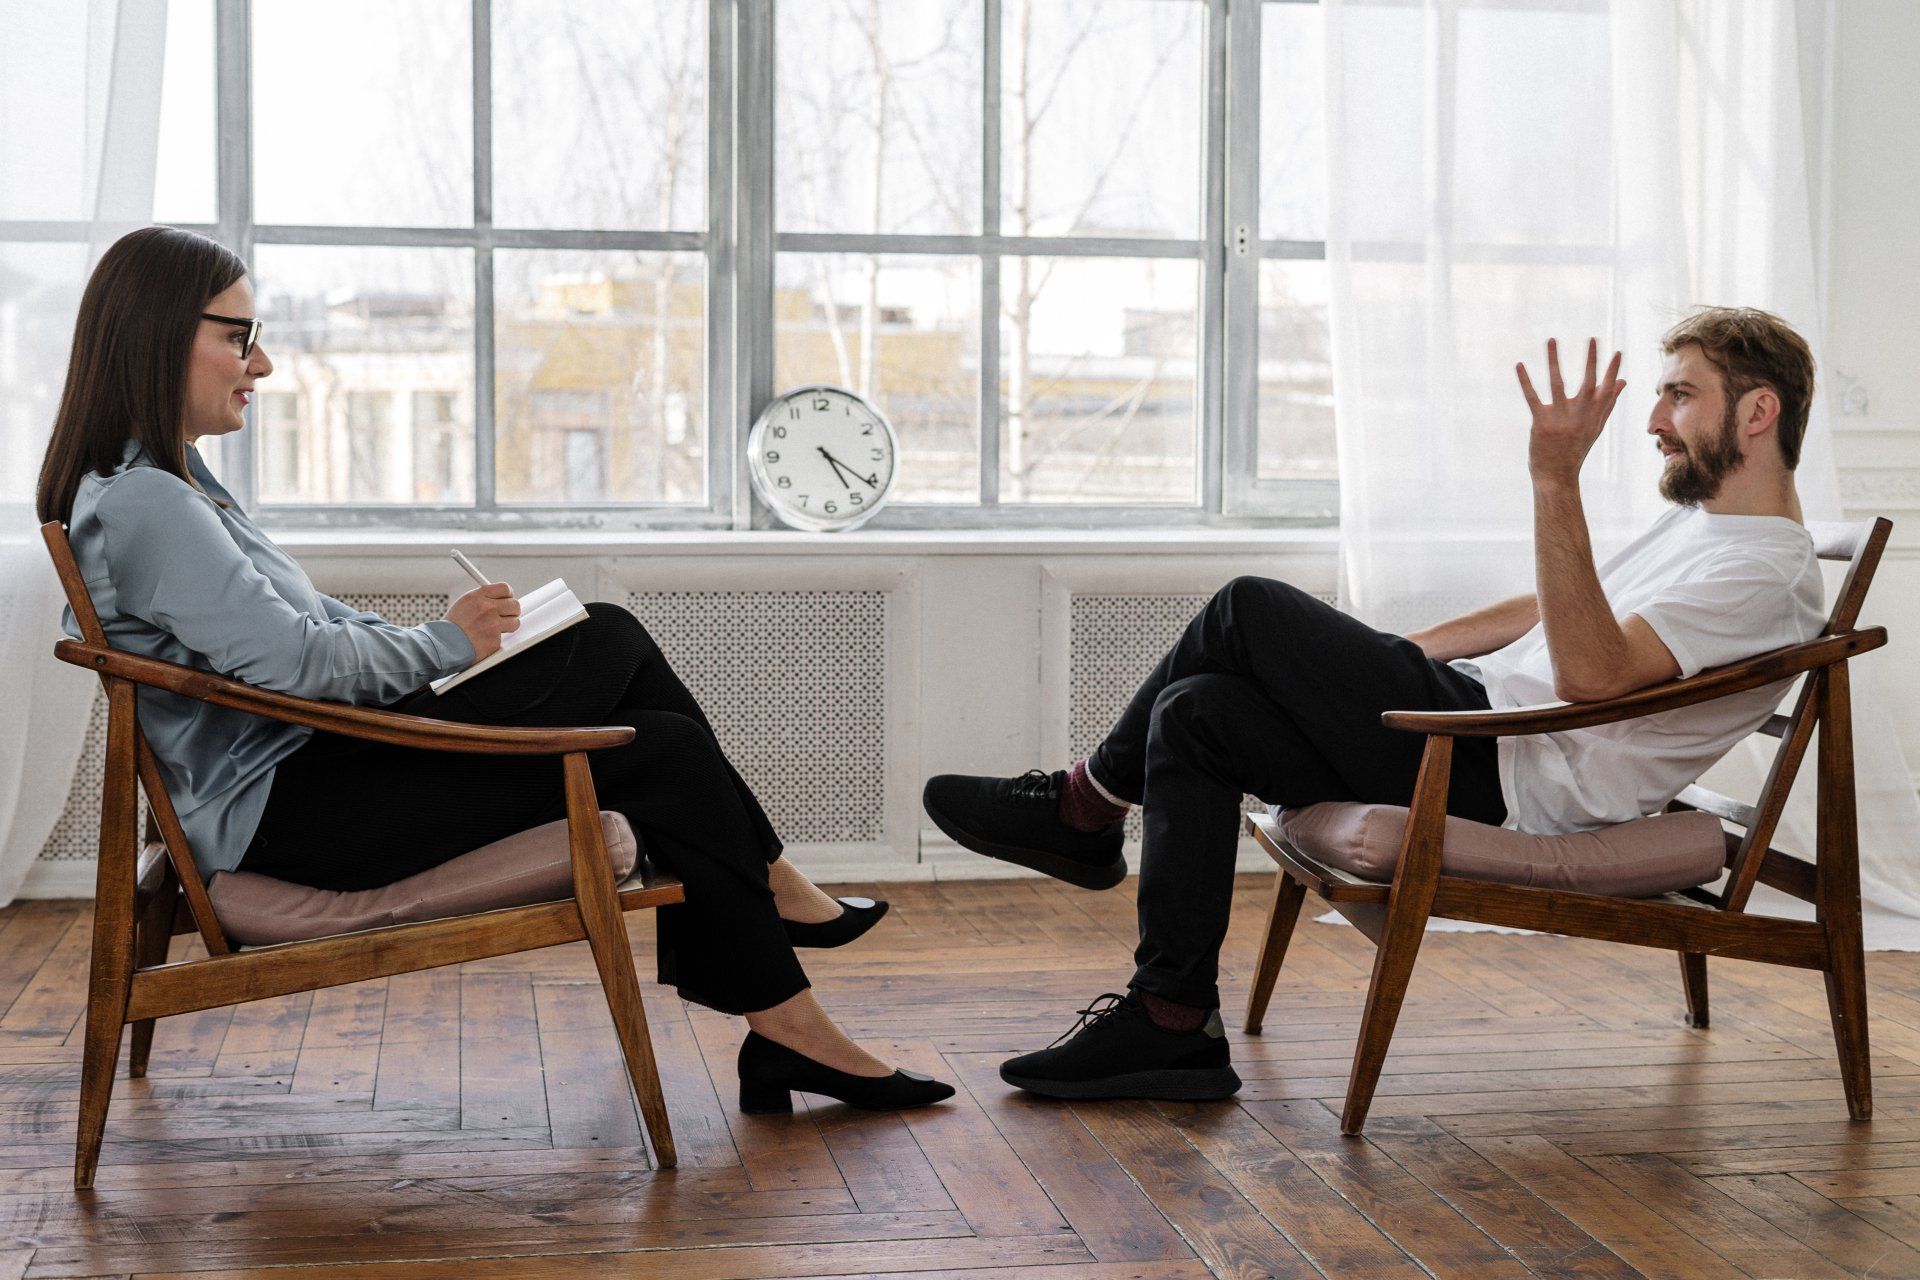 A man and a woman are sitting in chairs talking to each other.